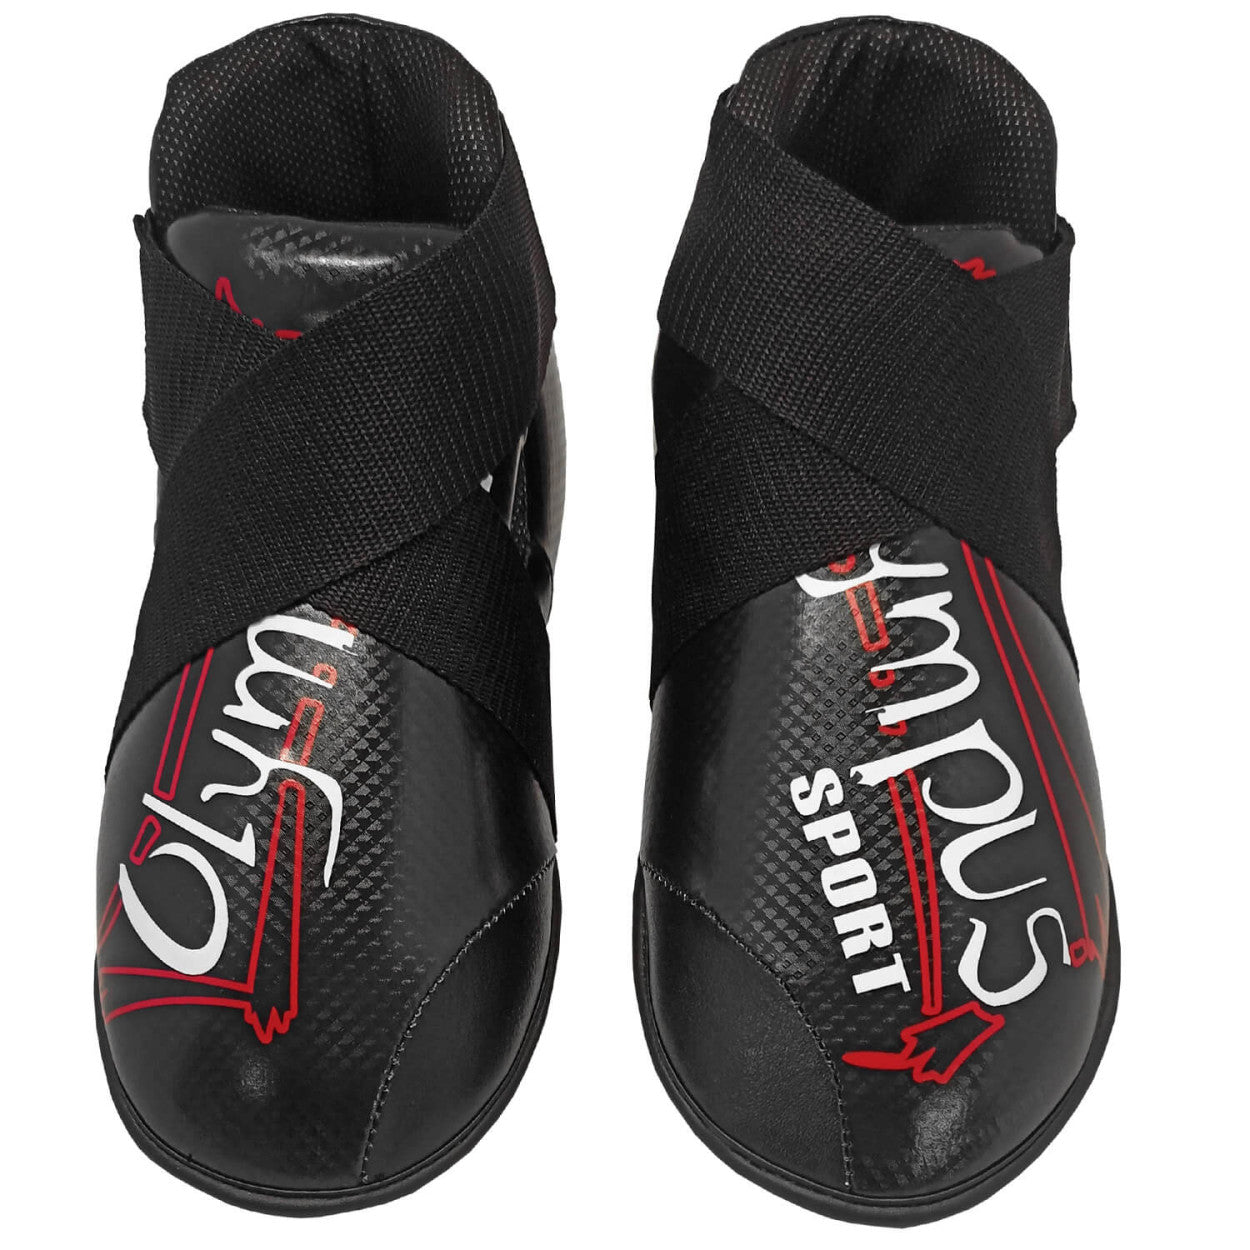 Pointfighting Shoes Olympus Carbon Fiber PU